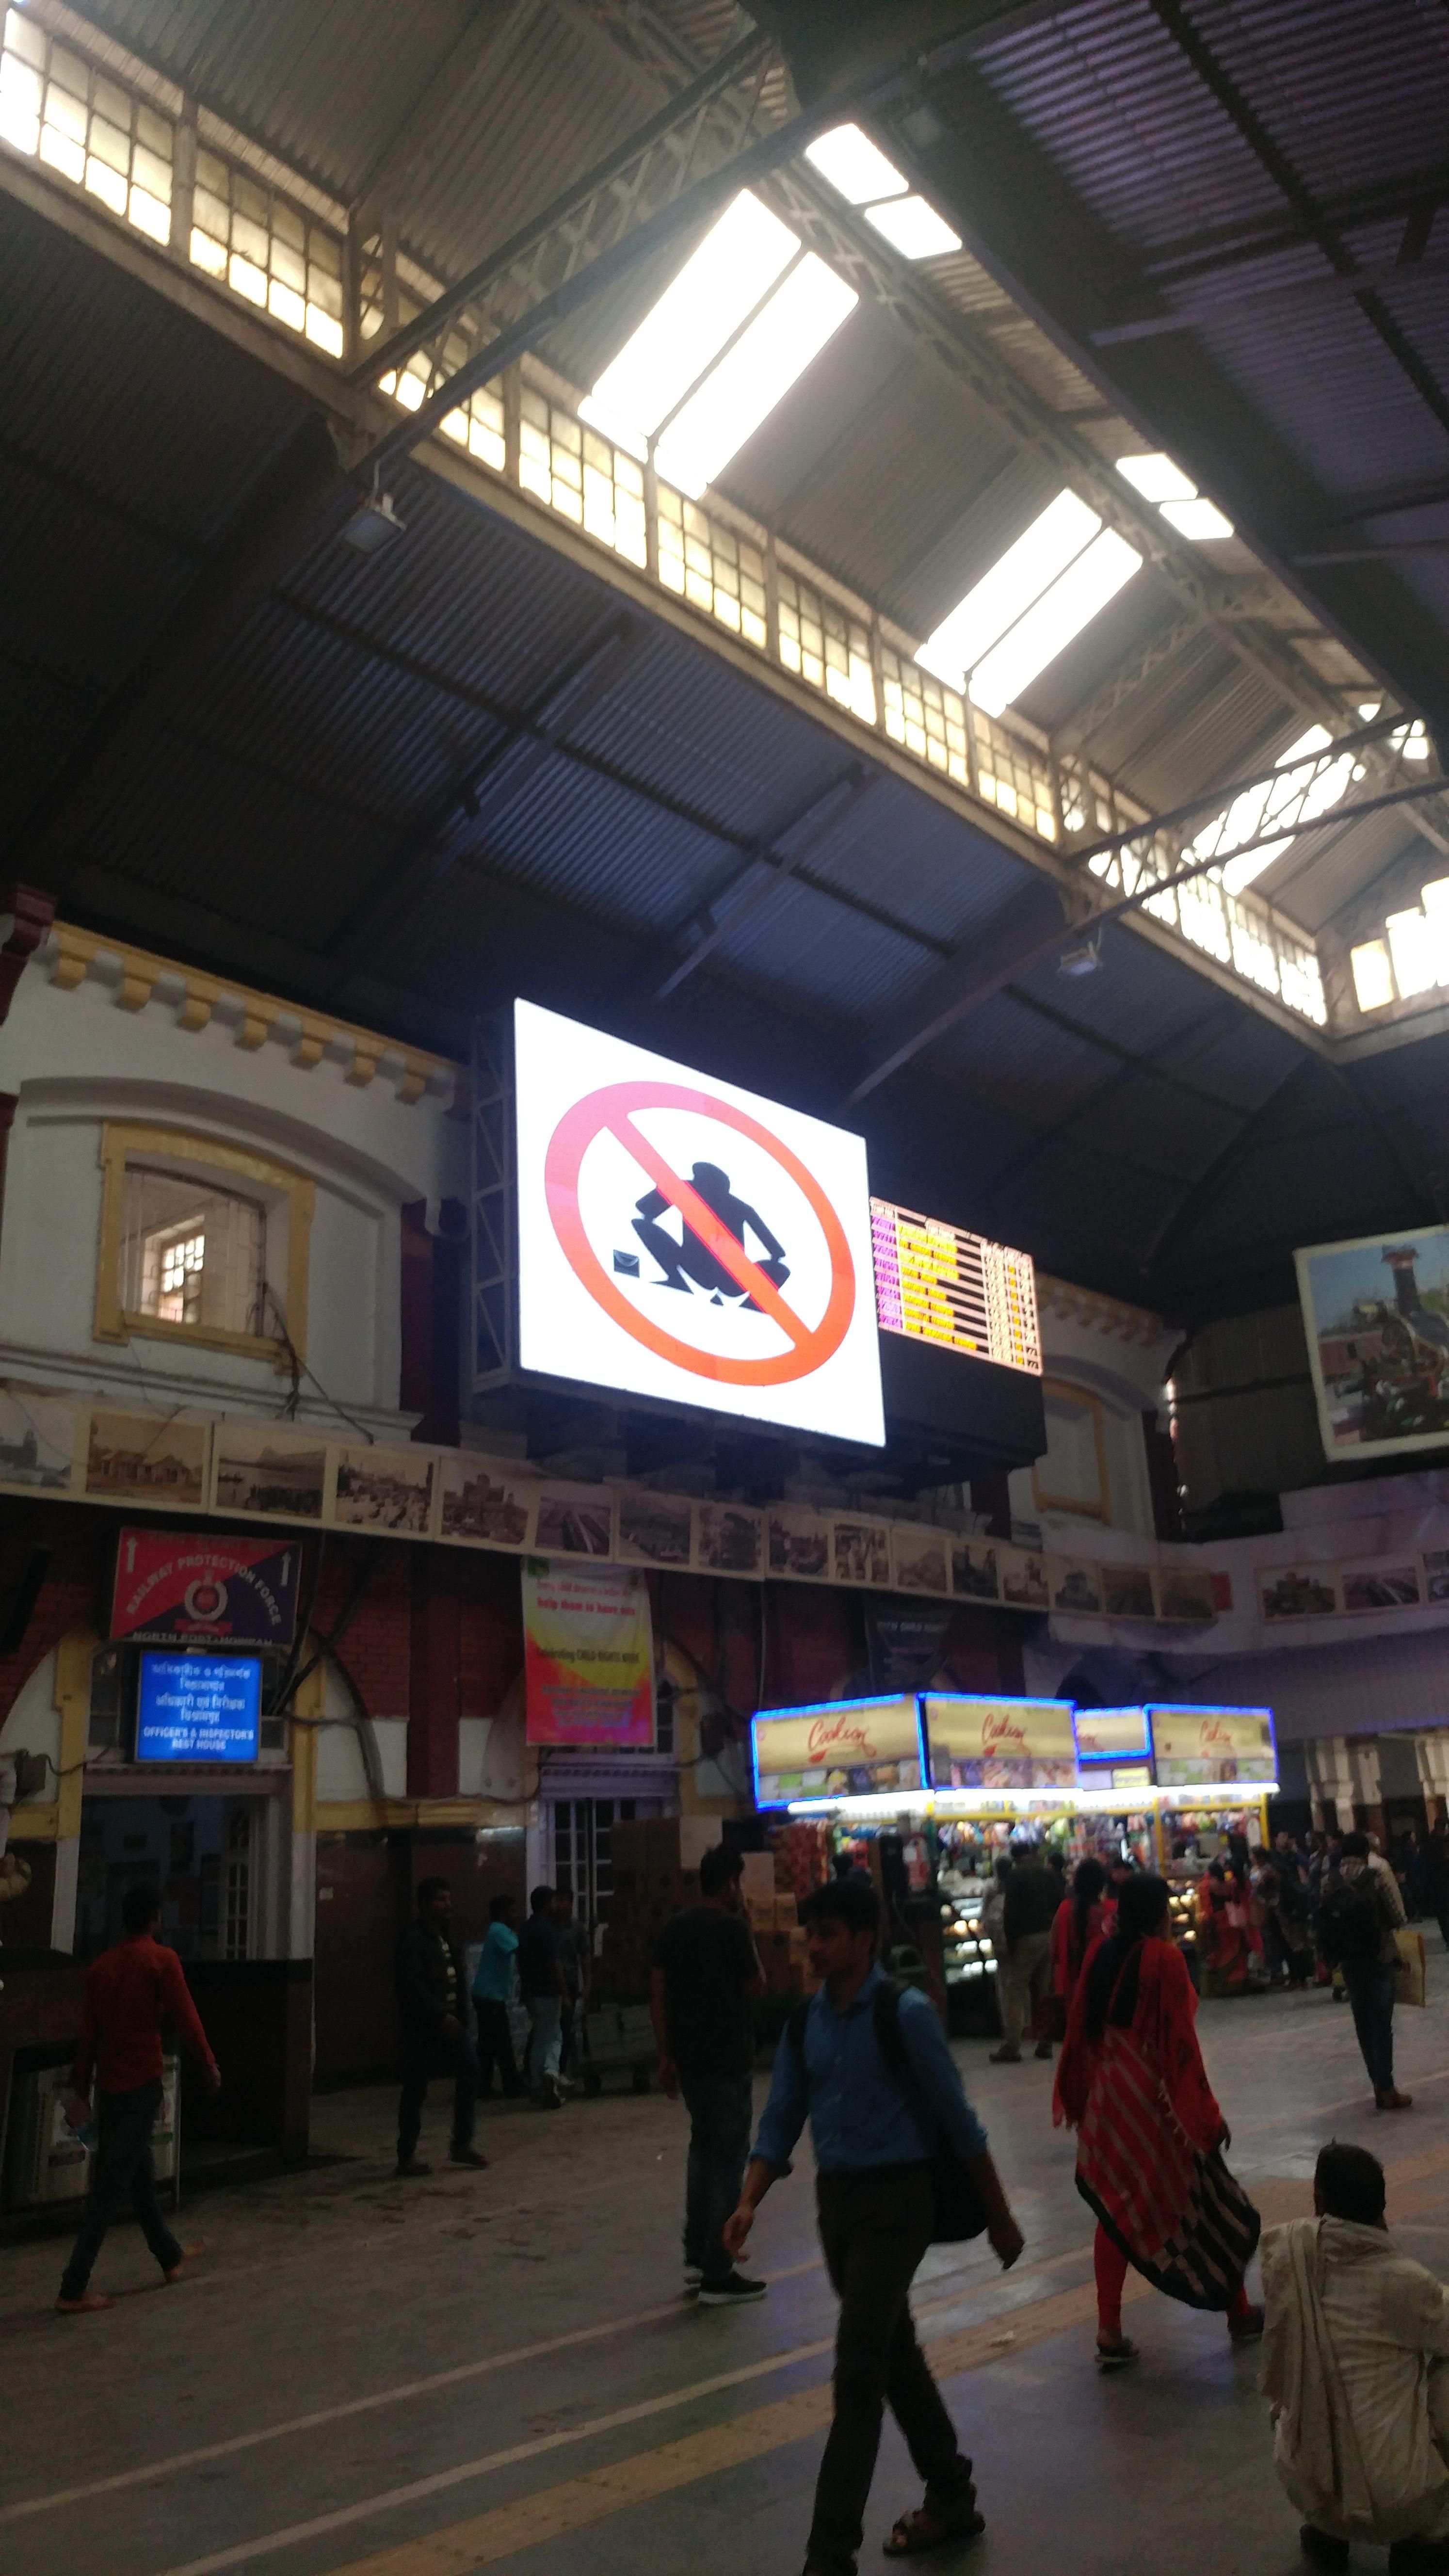 Here's a picture inside of the busiest railway station in India!